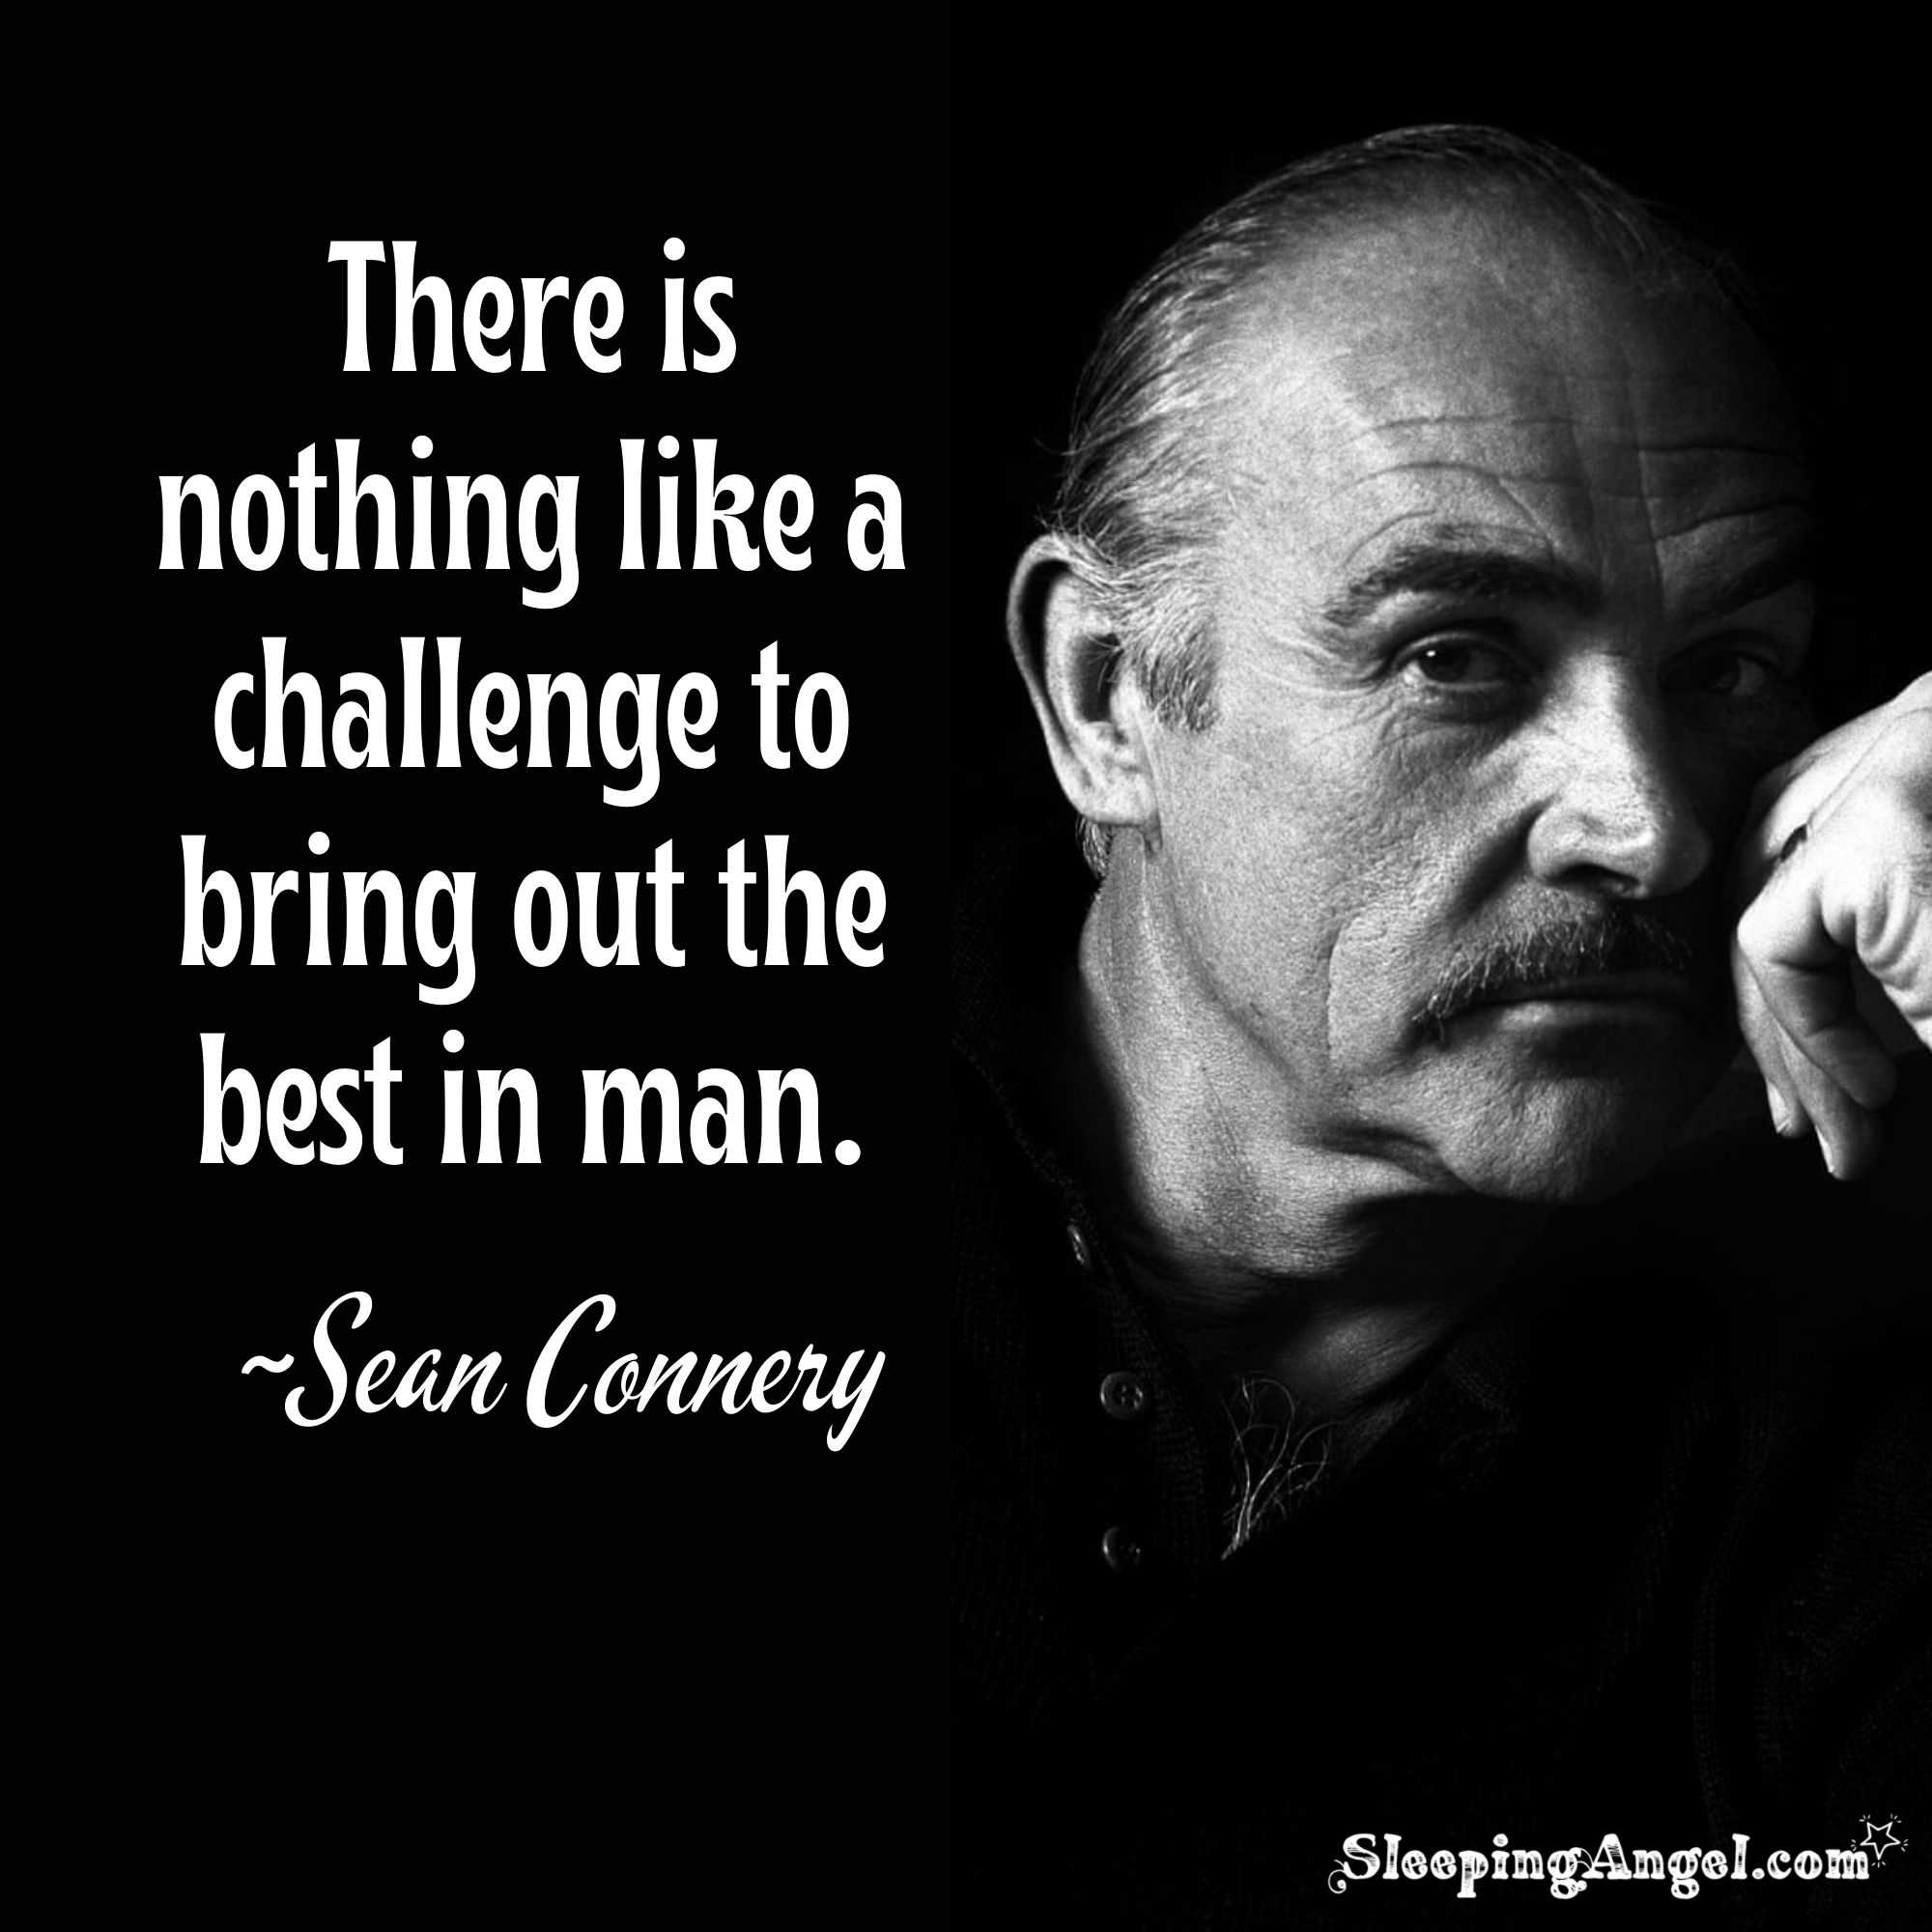 Sean Connery Quote